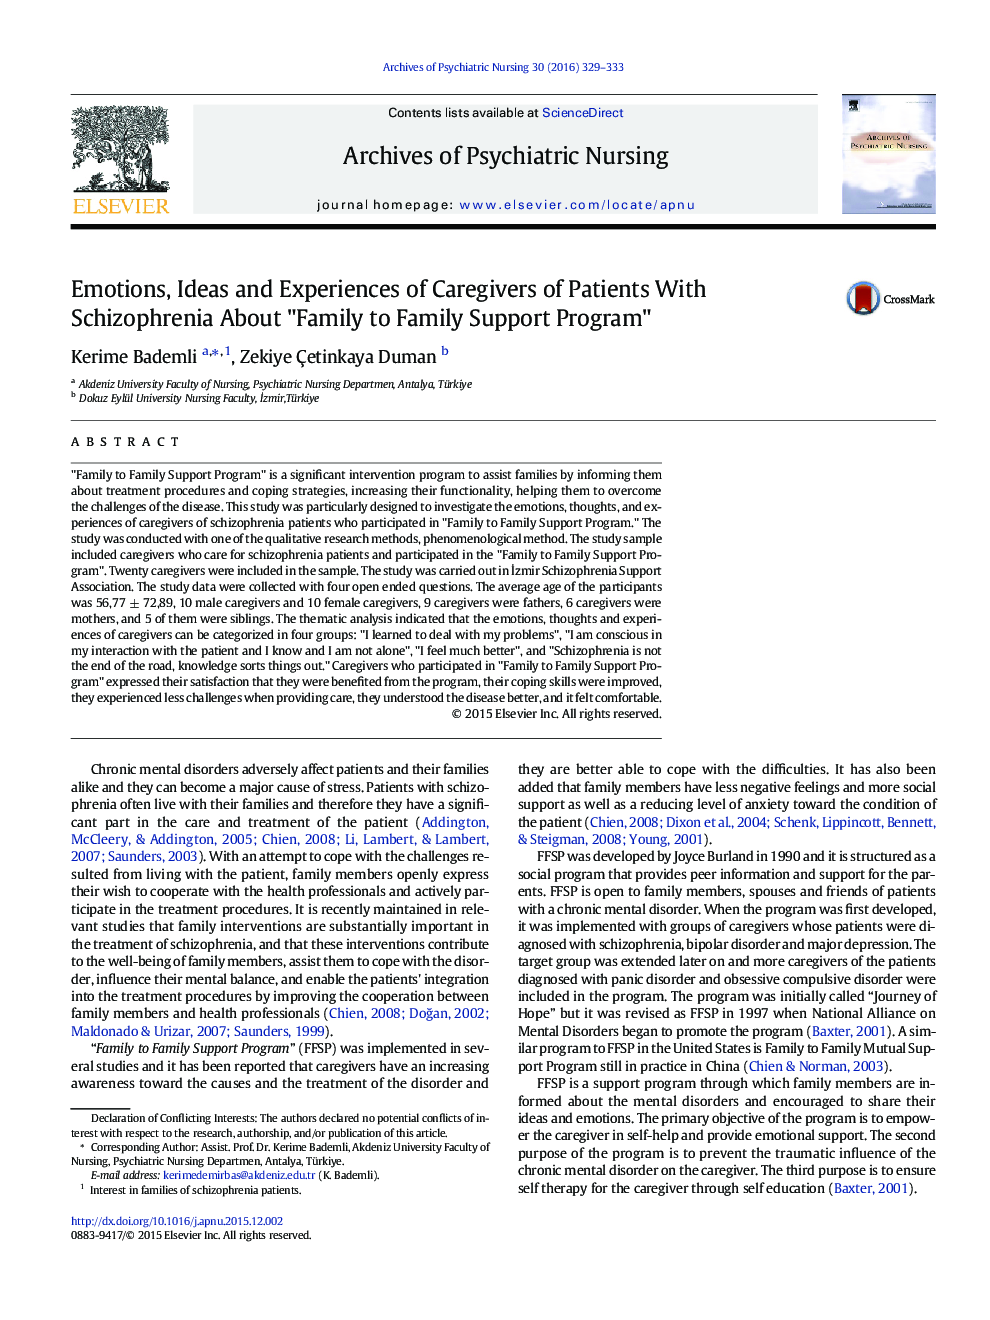 Emotions, Ideas and Experiences of Caregivers of Patients With Schizophrenia About "Family to Family Support Program" 